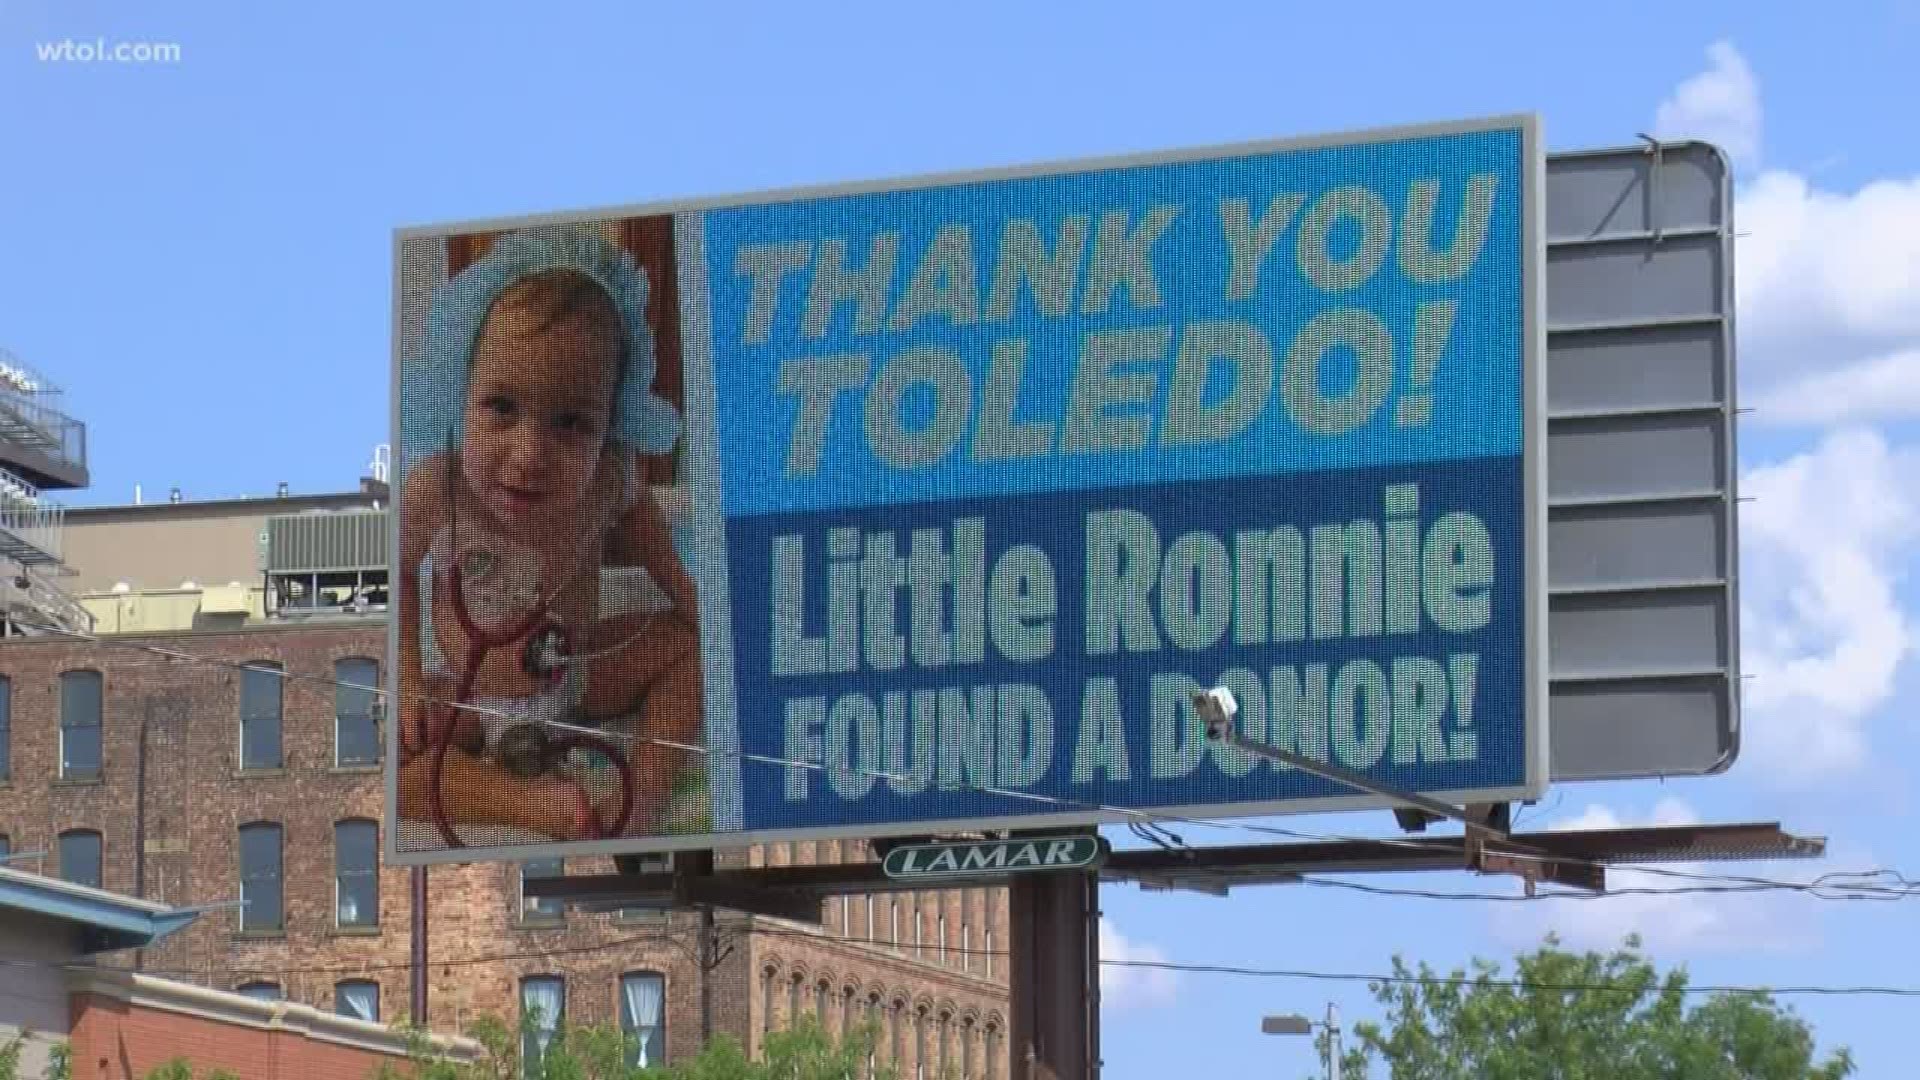 Lamar Advertising paid for the billboard. After a few months, good news came: a match came through and the child will get a transplant.